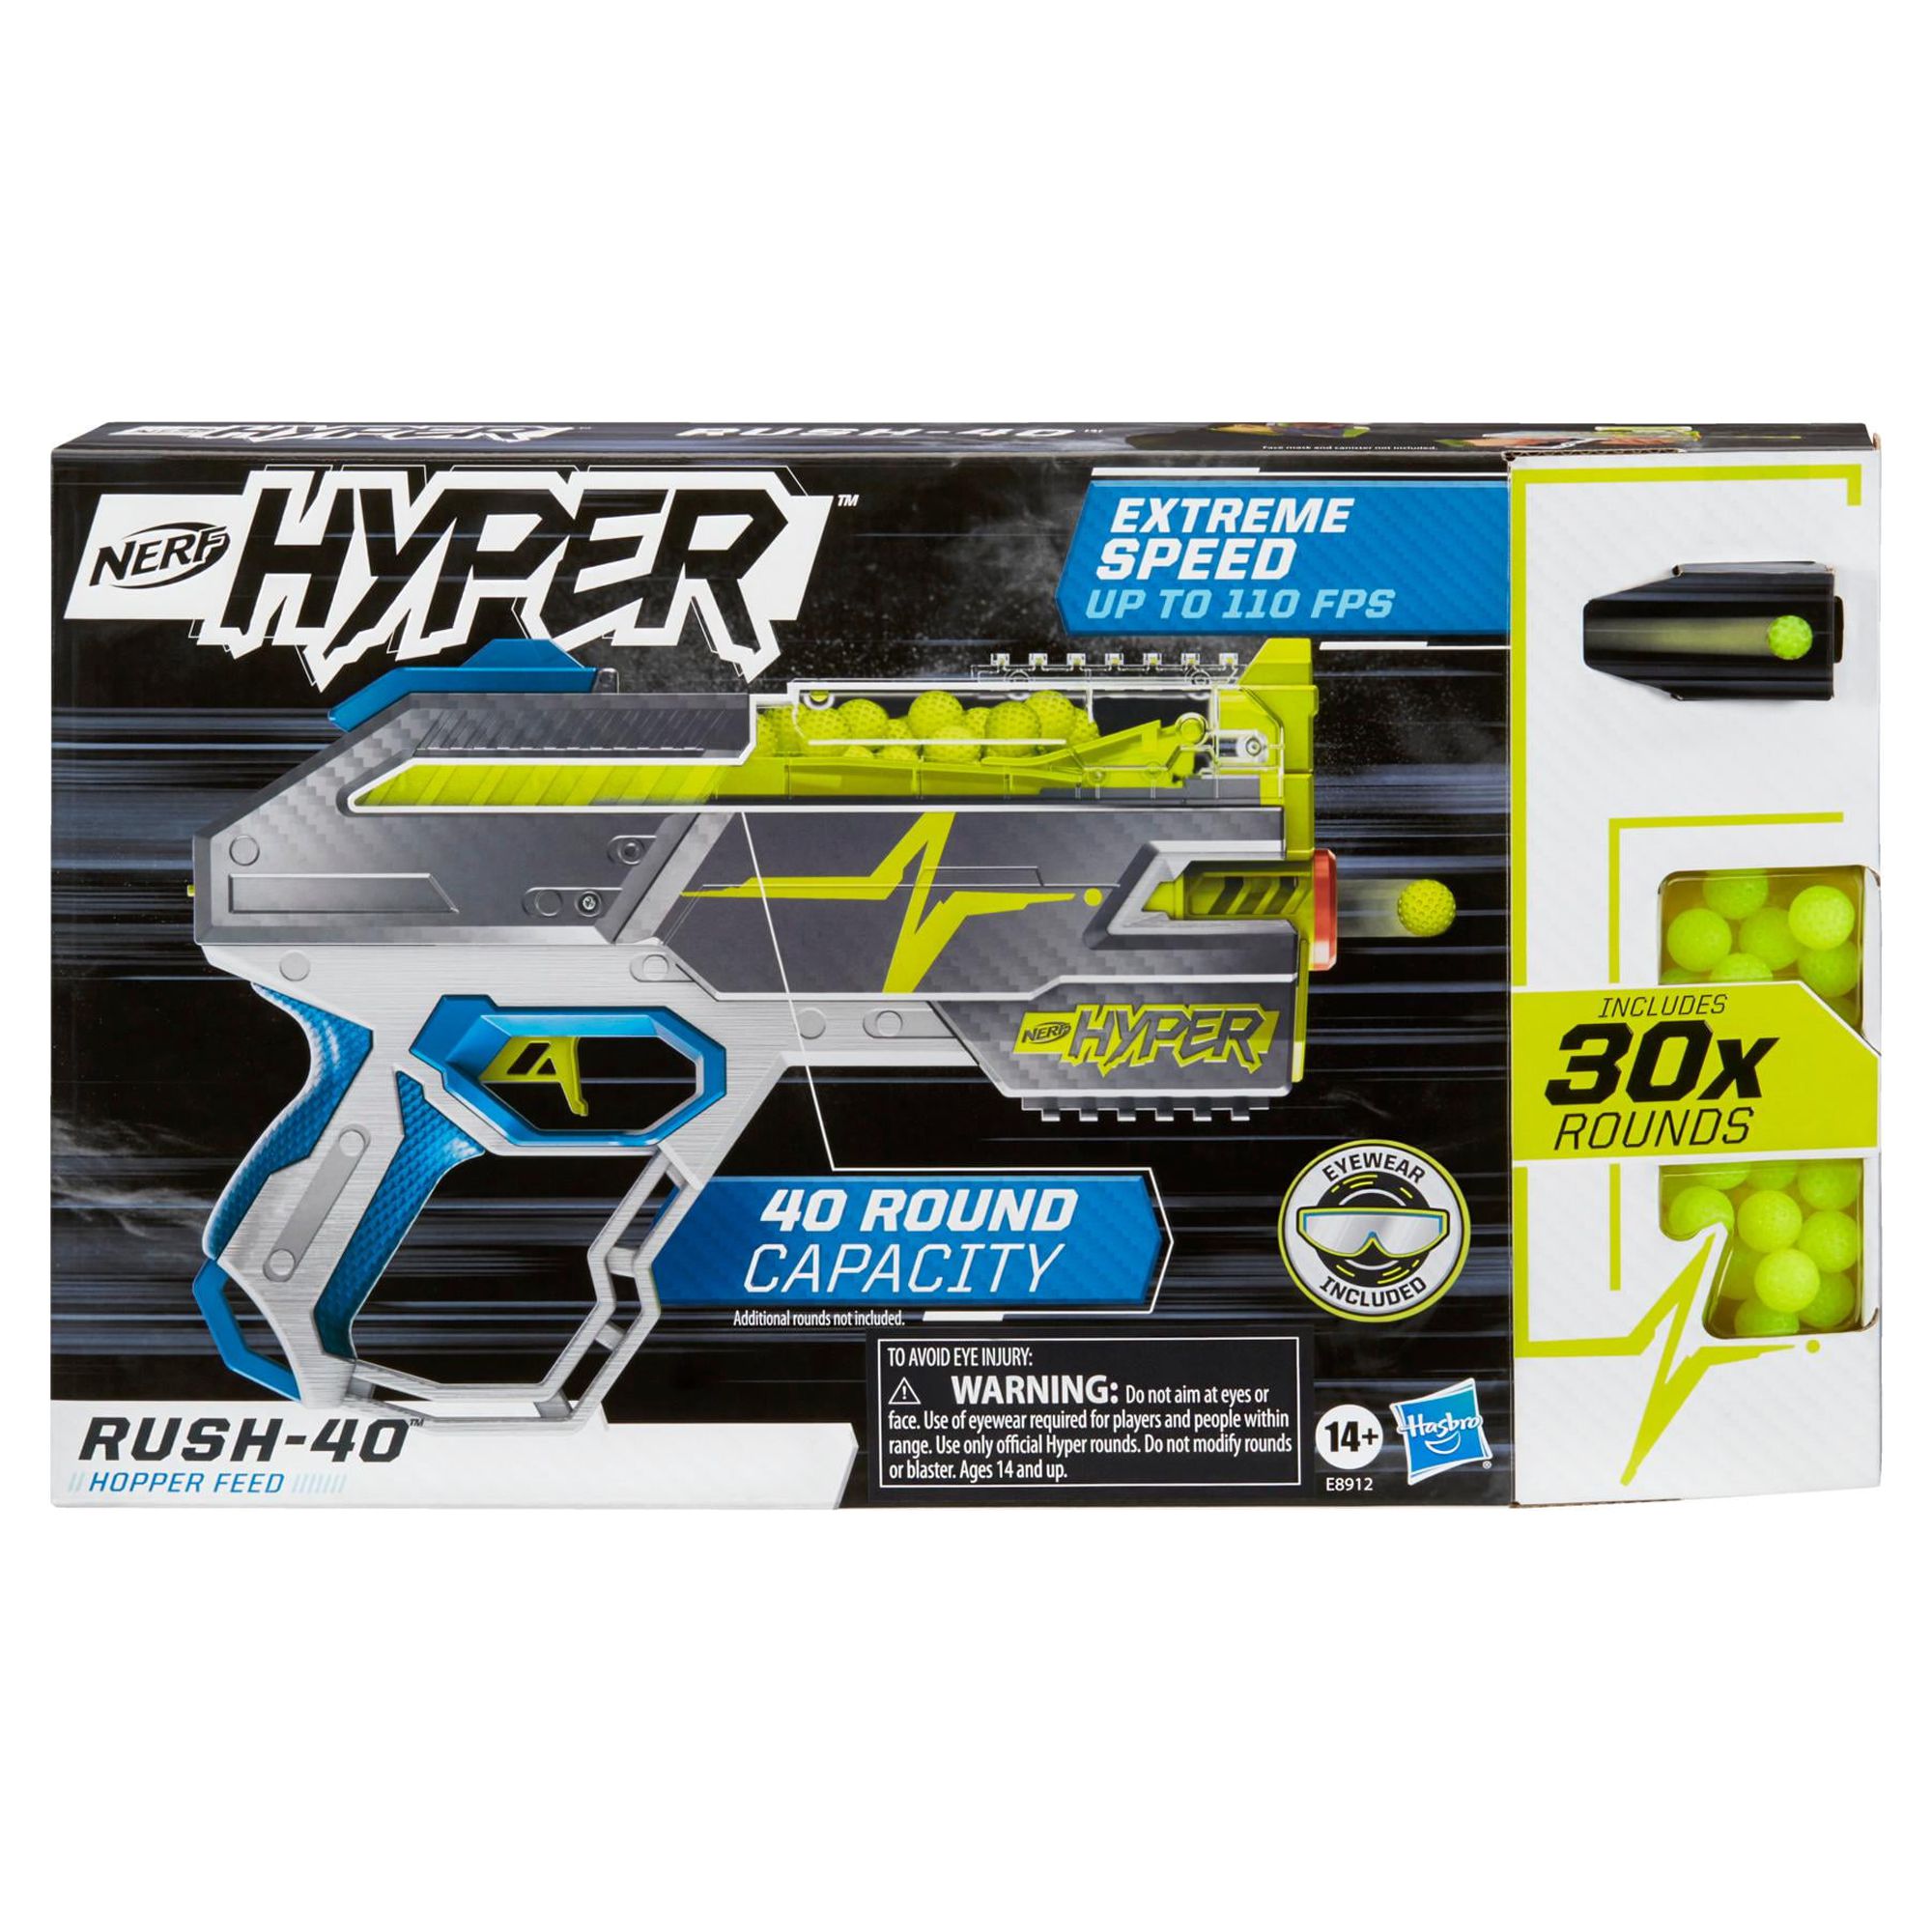 Nerf Hyper Rush-40 Pump-Action Blaster and 30 Nerf Hyper Rounds, 110 FPS Velocity, Easy Reload, 40-Round Capacity - image 3 of 8